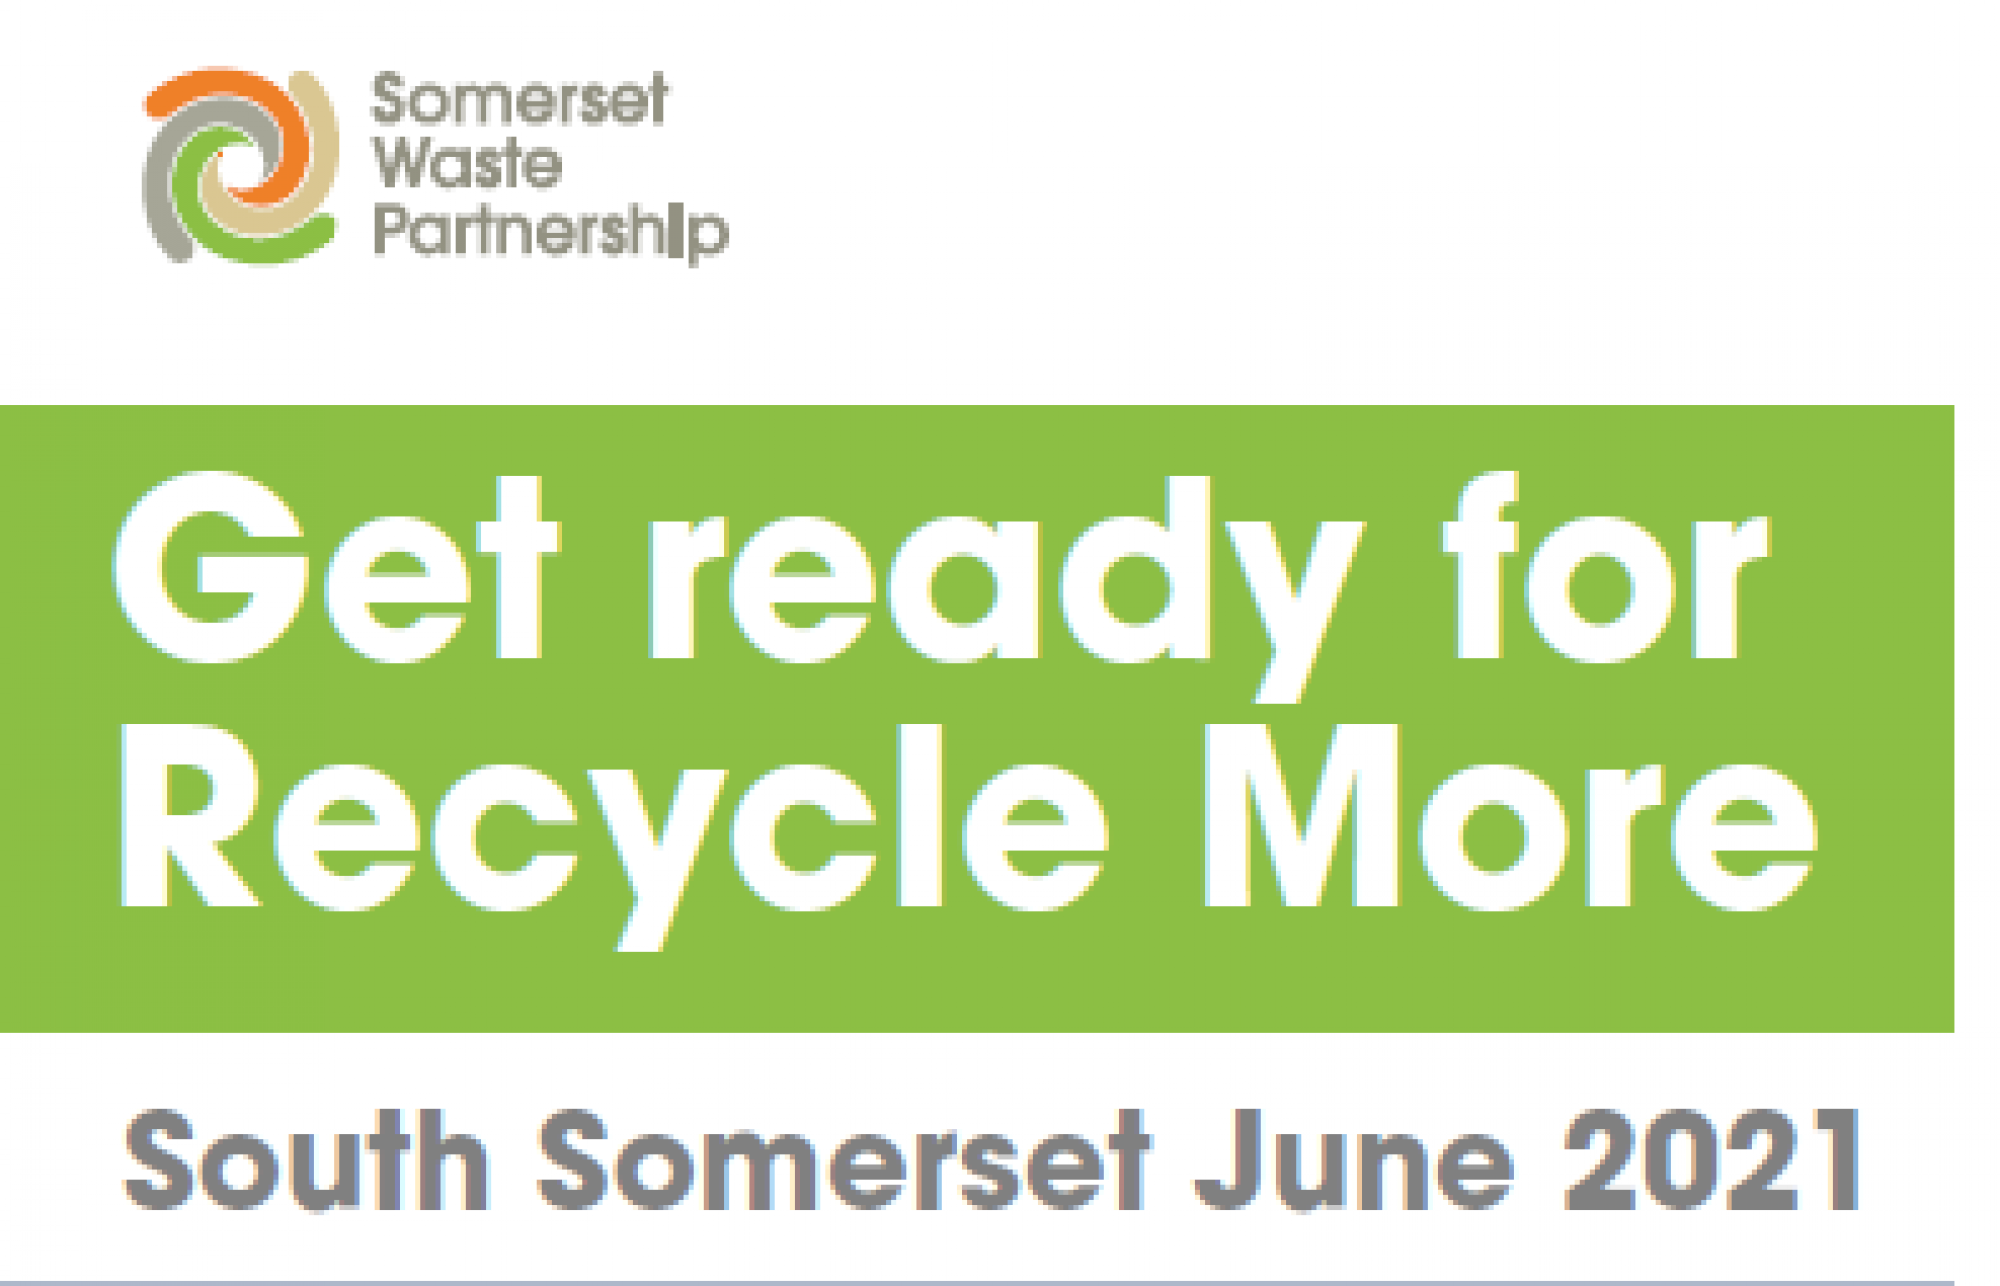 Somerset Waste Partnership, Recycle More information